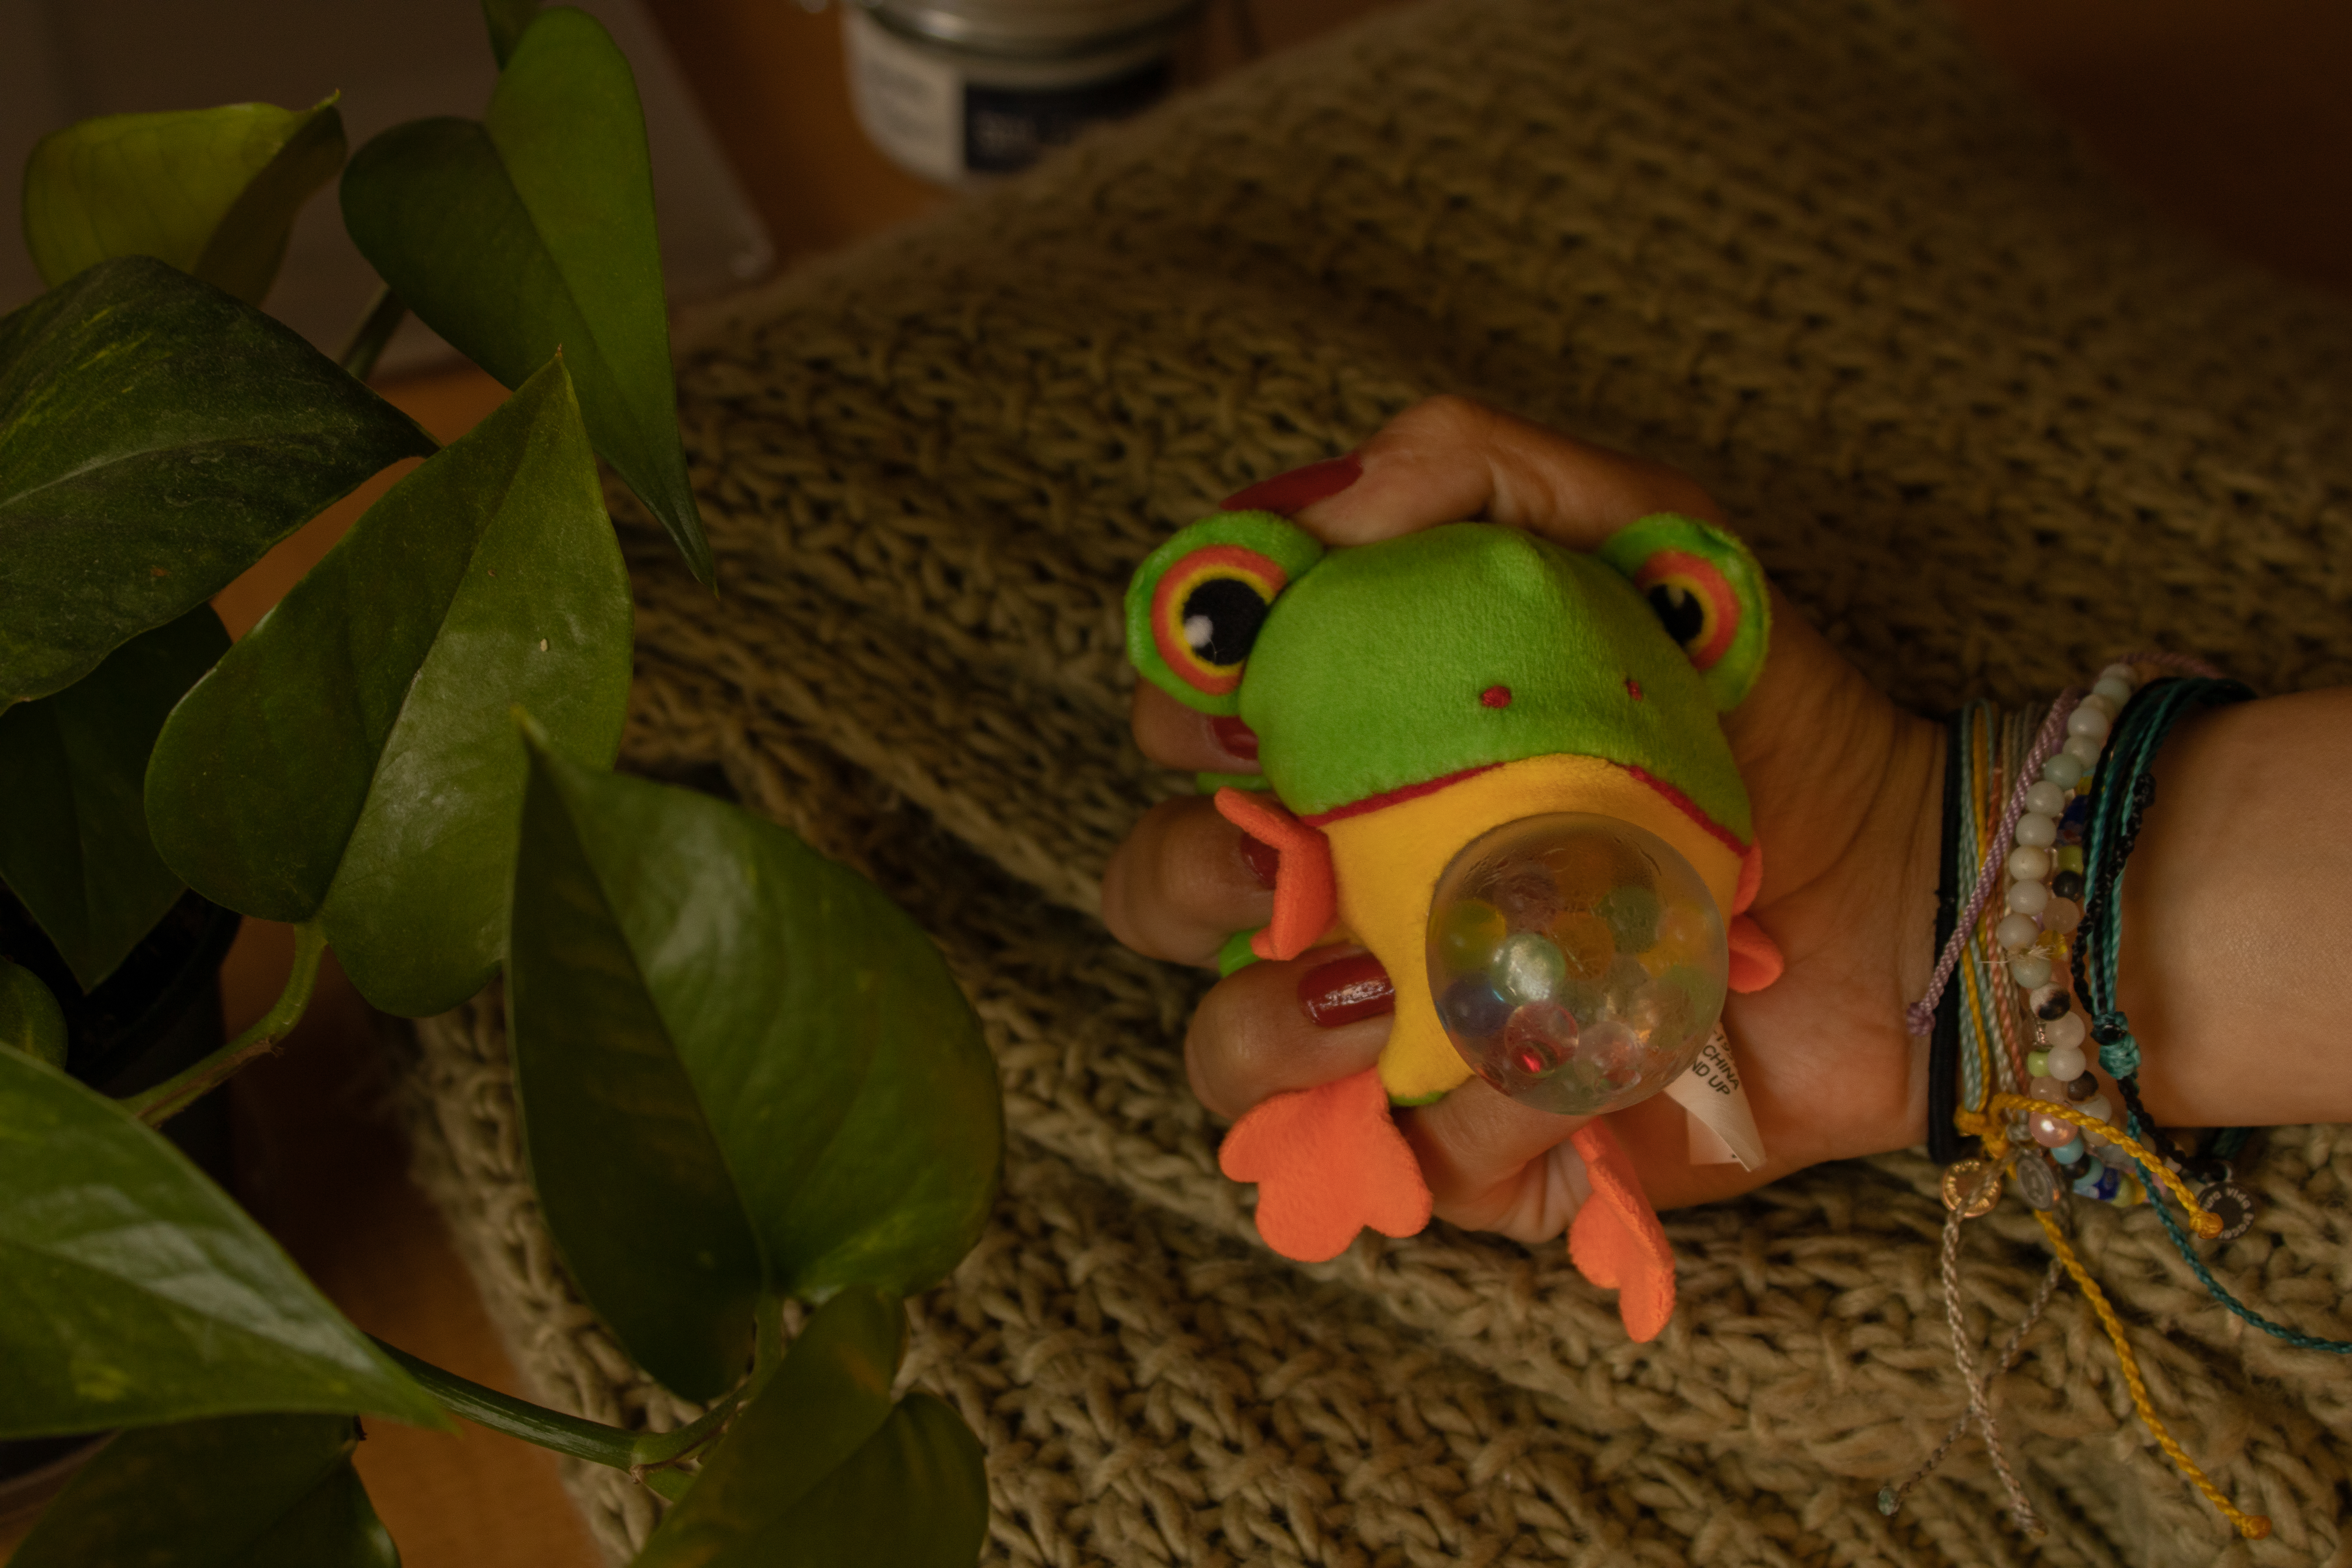 frog toy being squished.